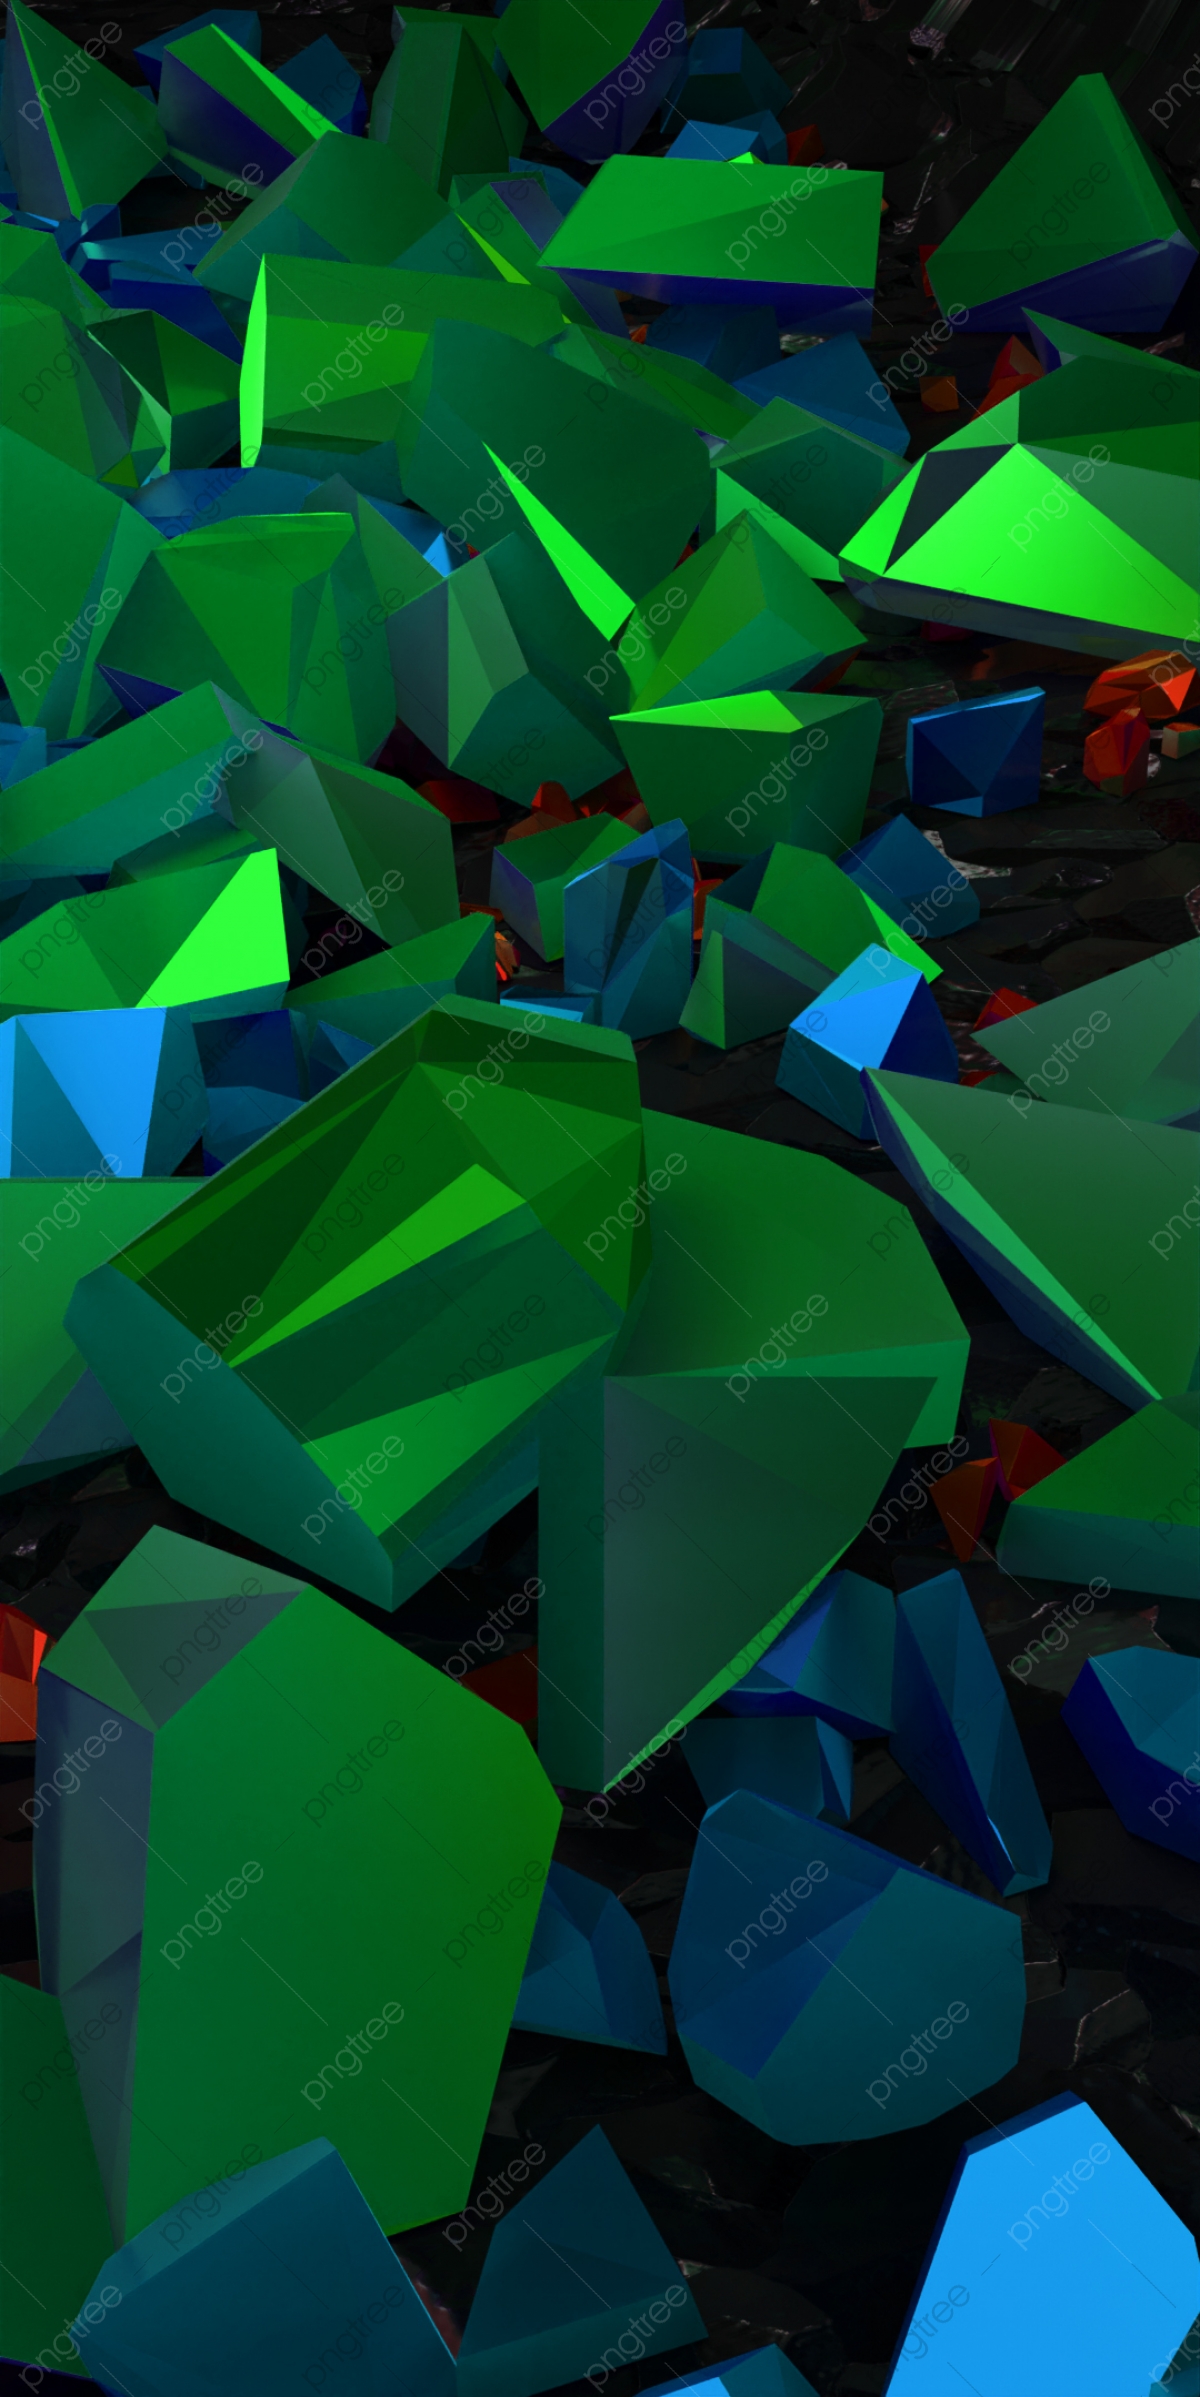 Green Crystals Wallpapers